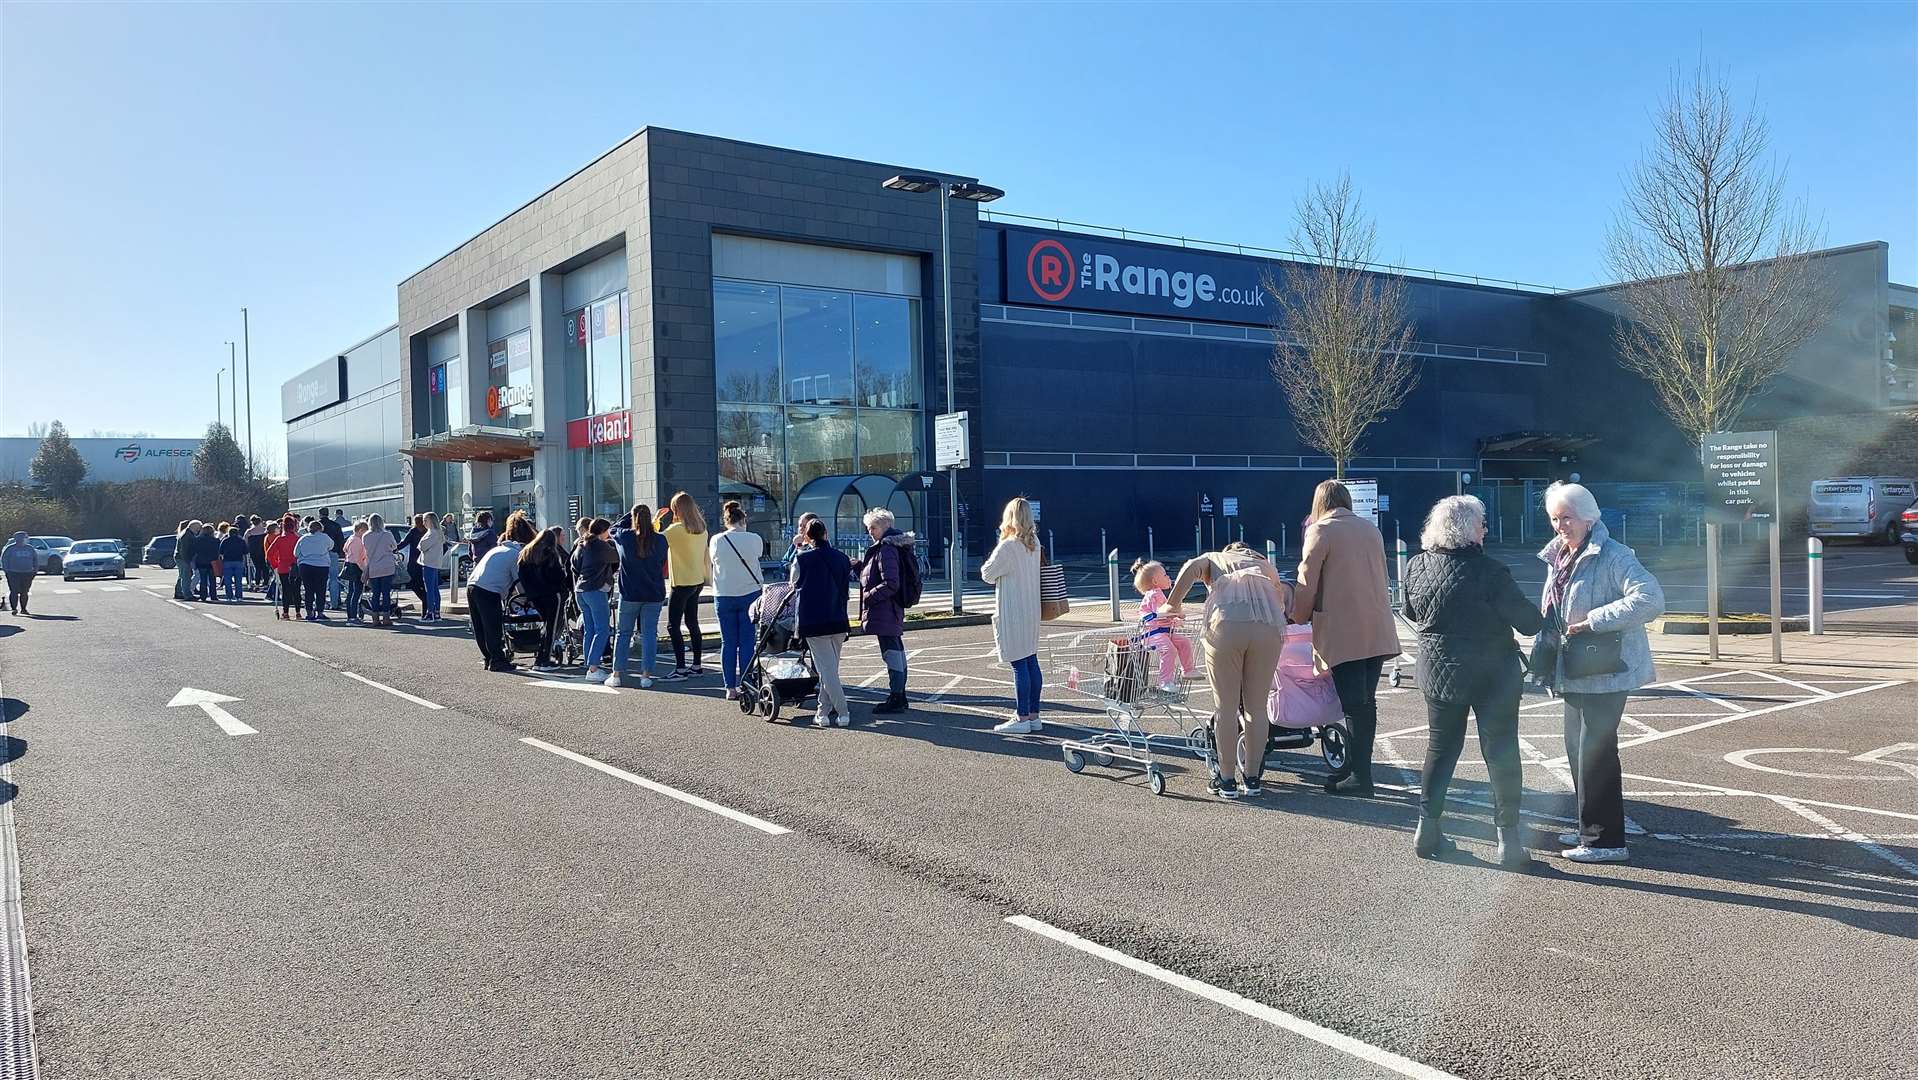 A long queue of shoppers before the store opened at 9am